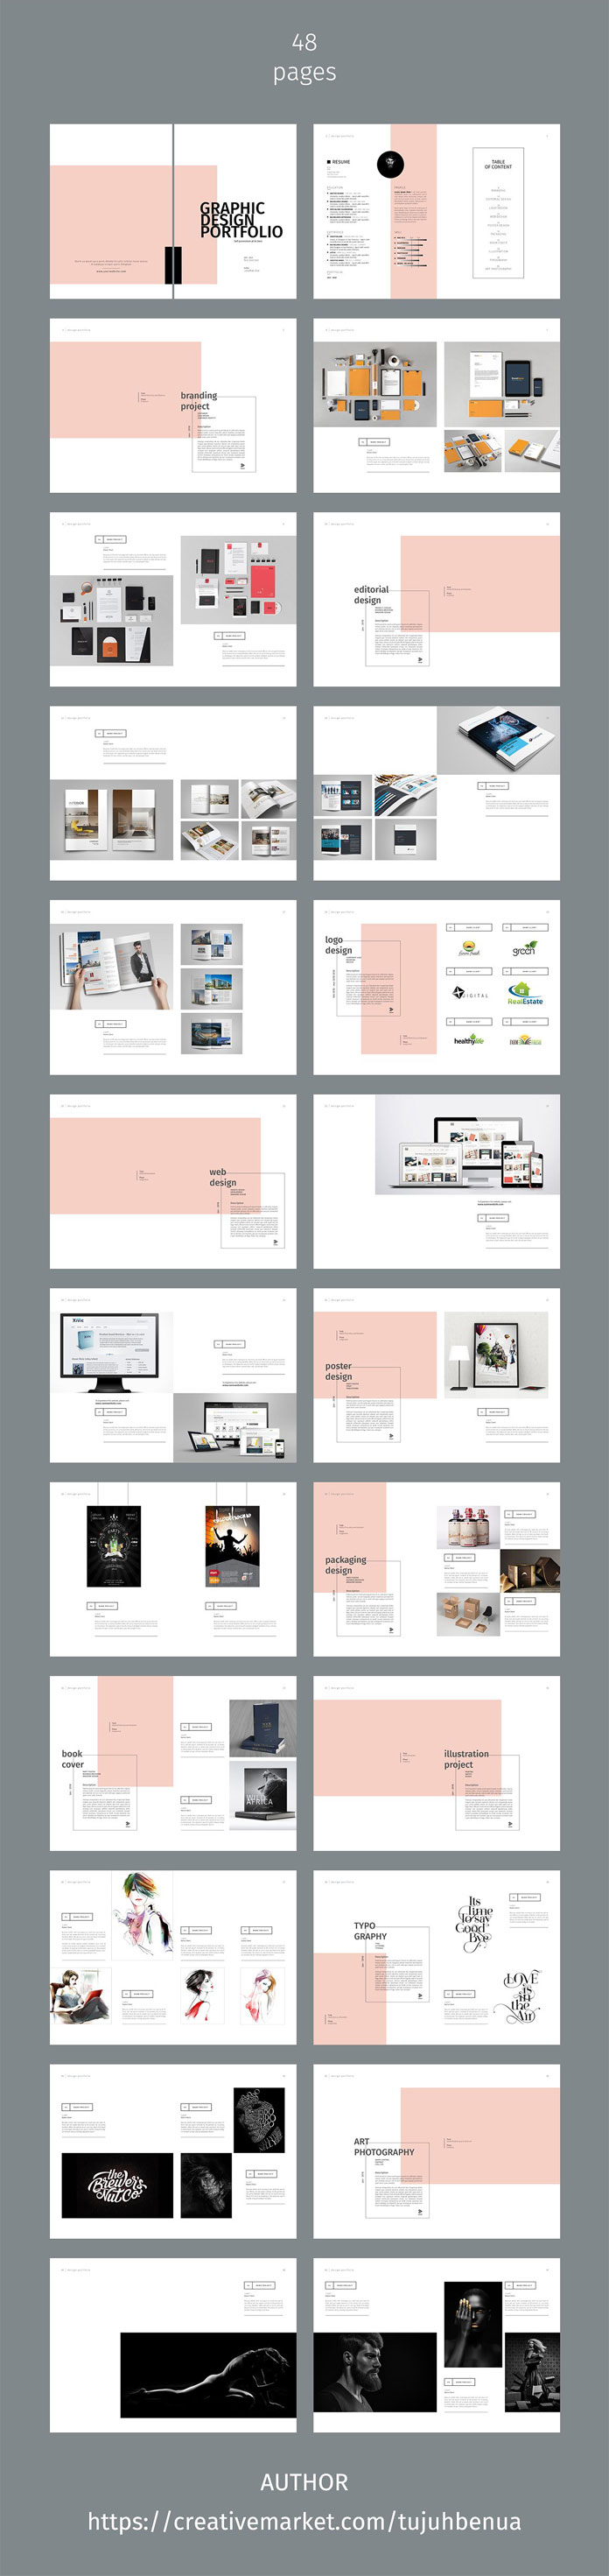 Graphic design portfolio template with 48 pages.